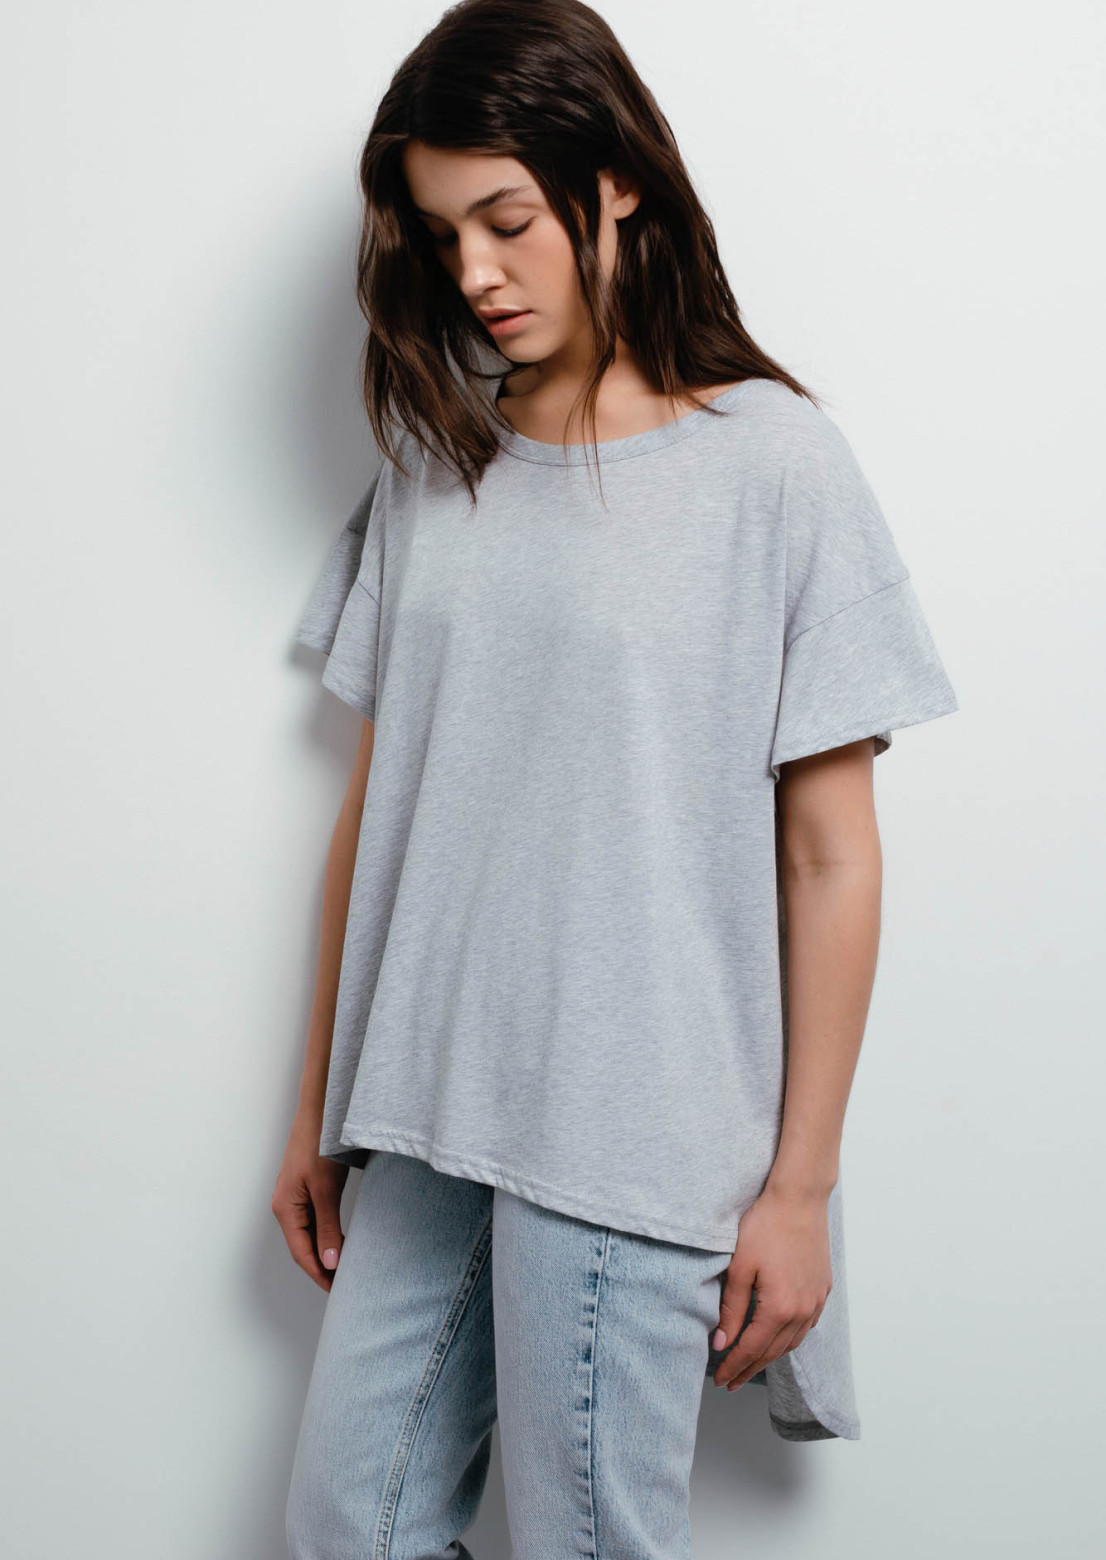 Grey melange T-shirt with a tail made of jersey